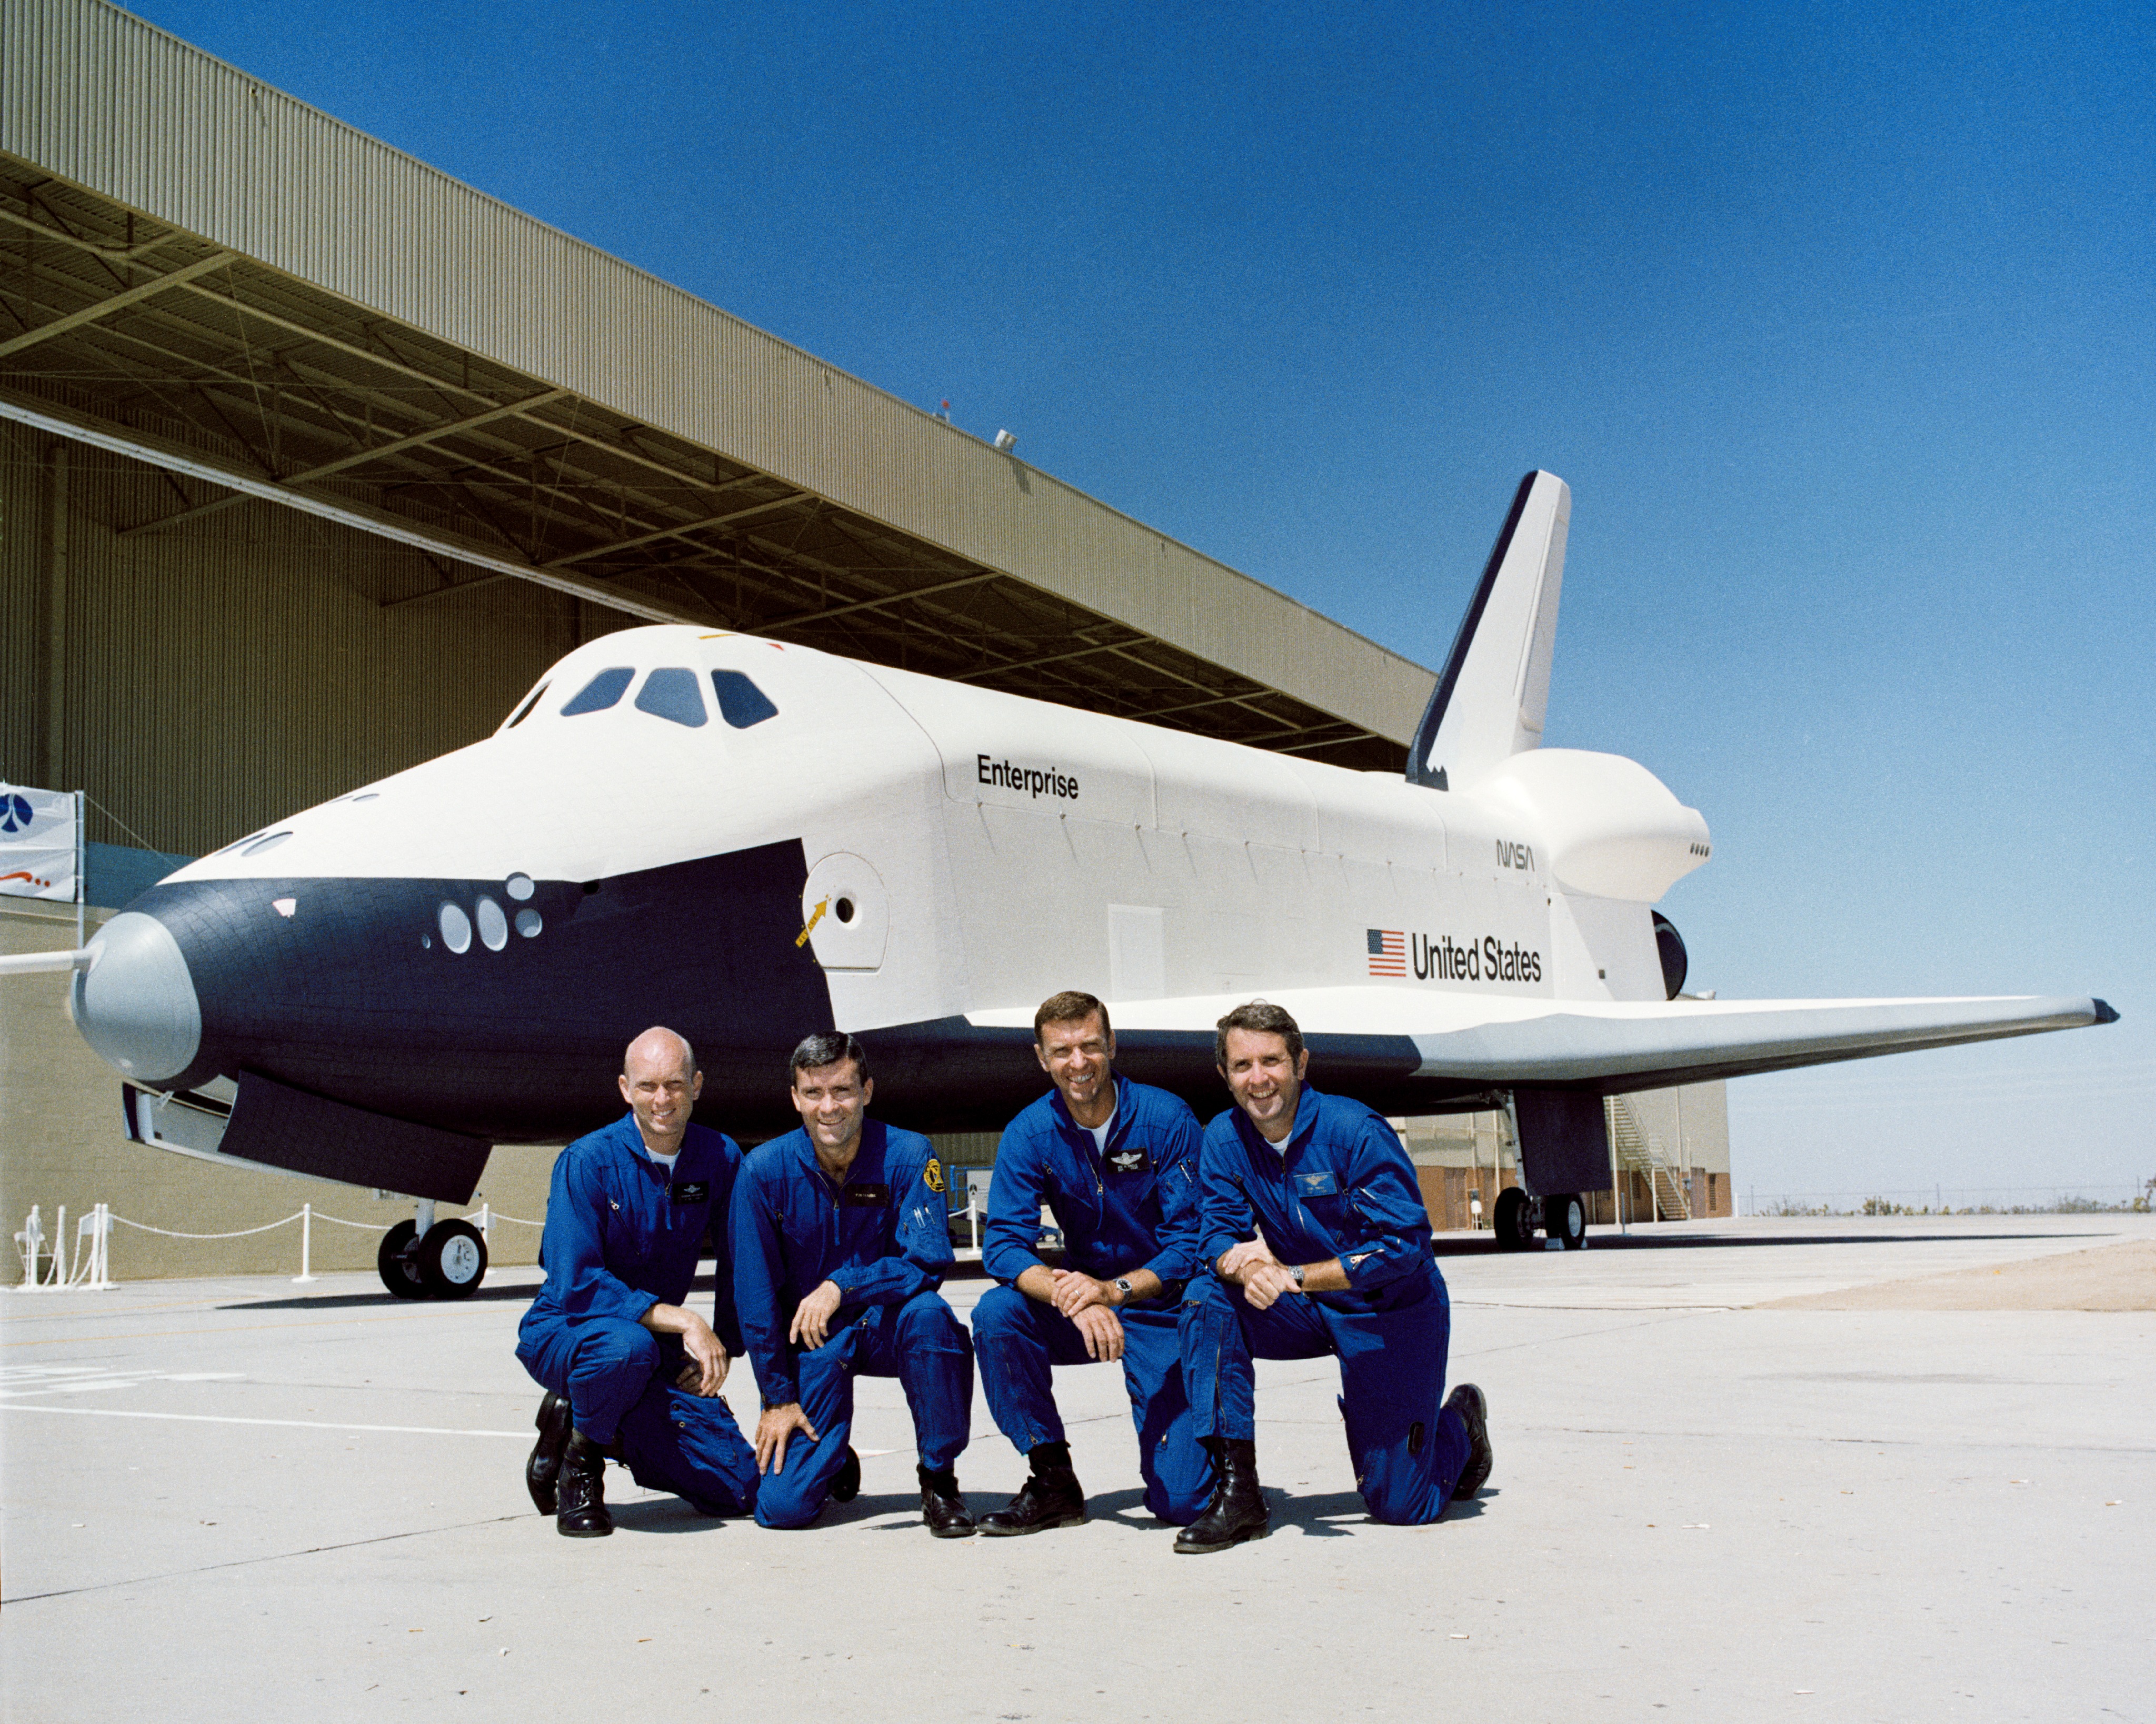 Astronauts C. Gordon Fullerton, left, Fred W. Haise, Joe H. Engle, and Richard H. Truly pose in front of Enterprise on the day of its rollout